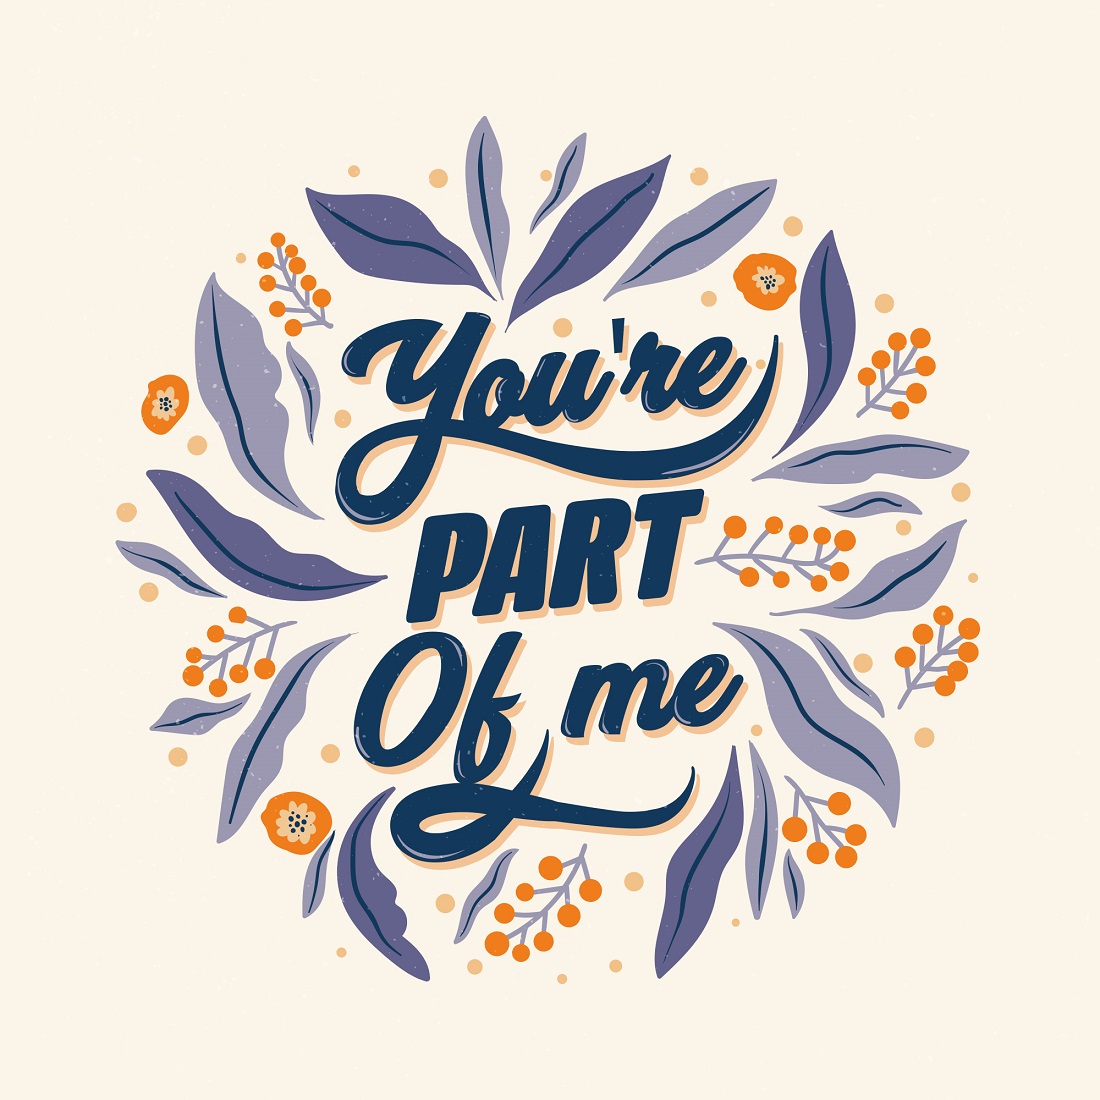 You're part OF me wedding lettering cover image.